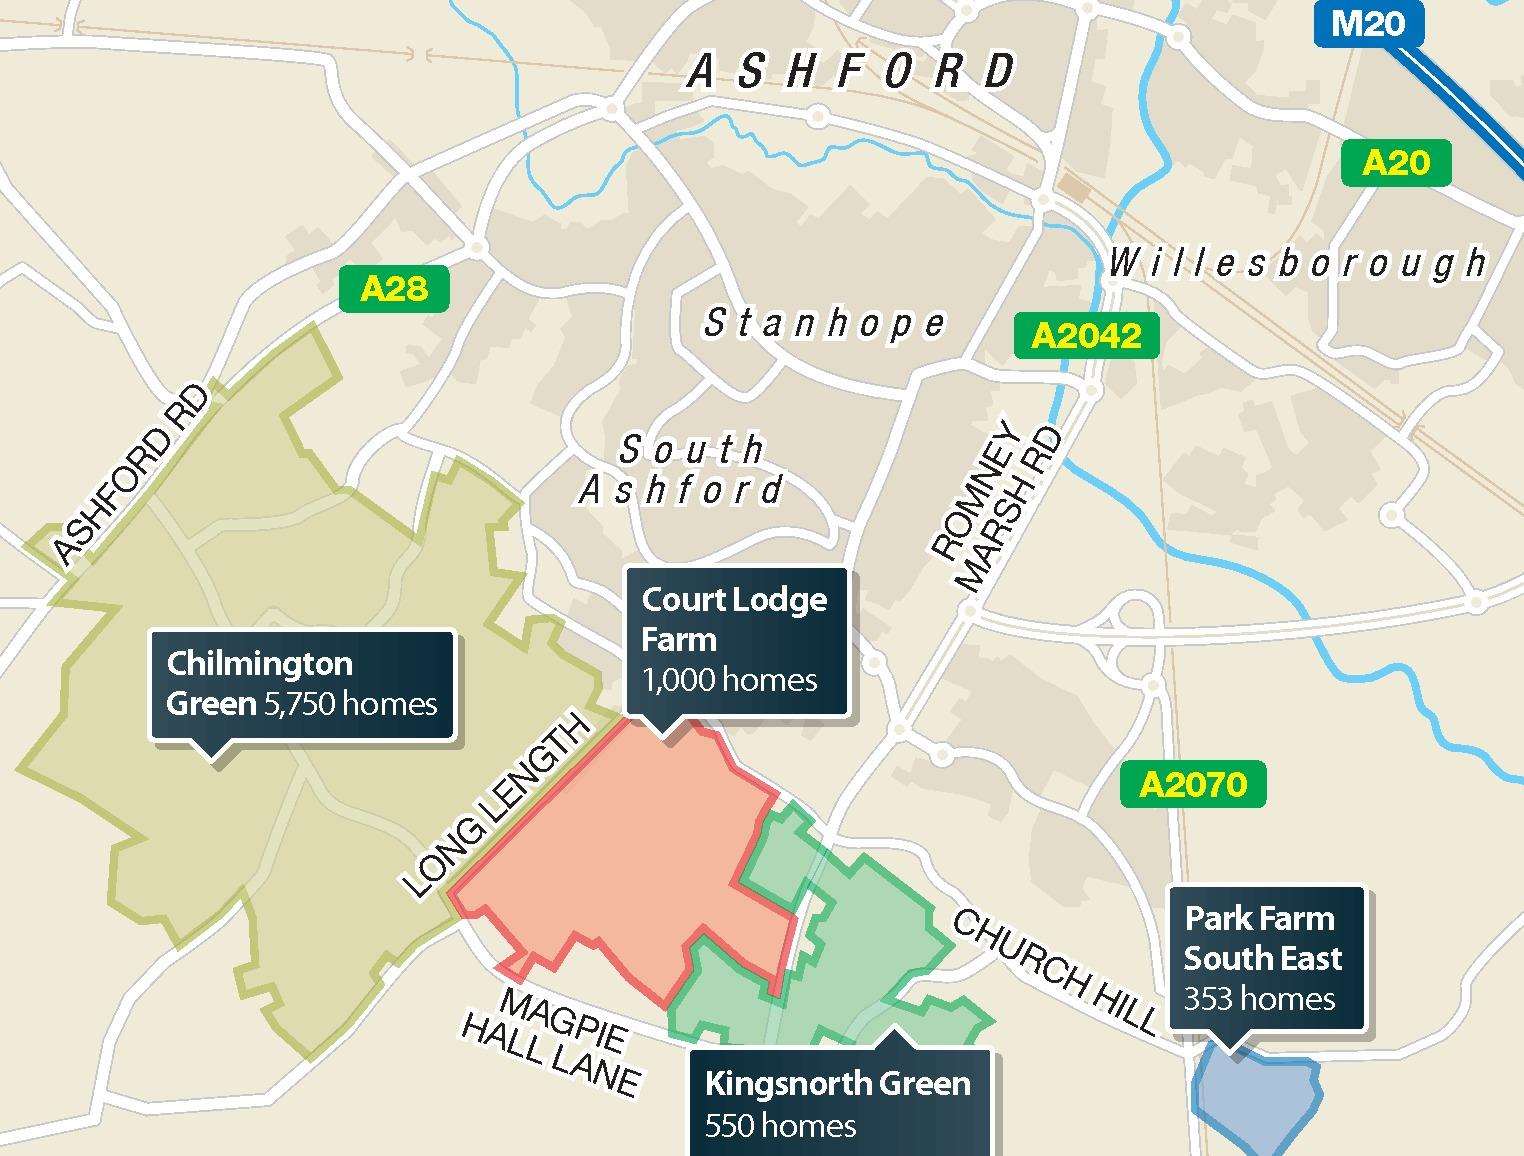 The proposed developments in Kingsnorth